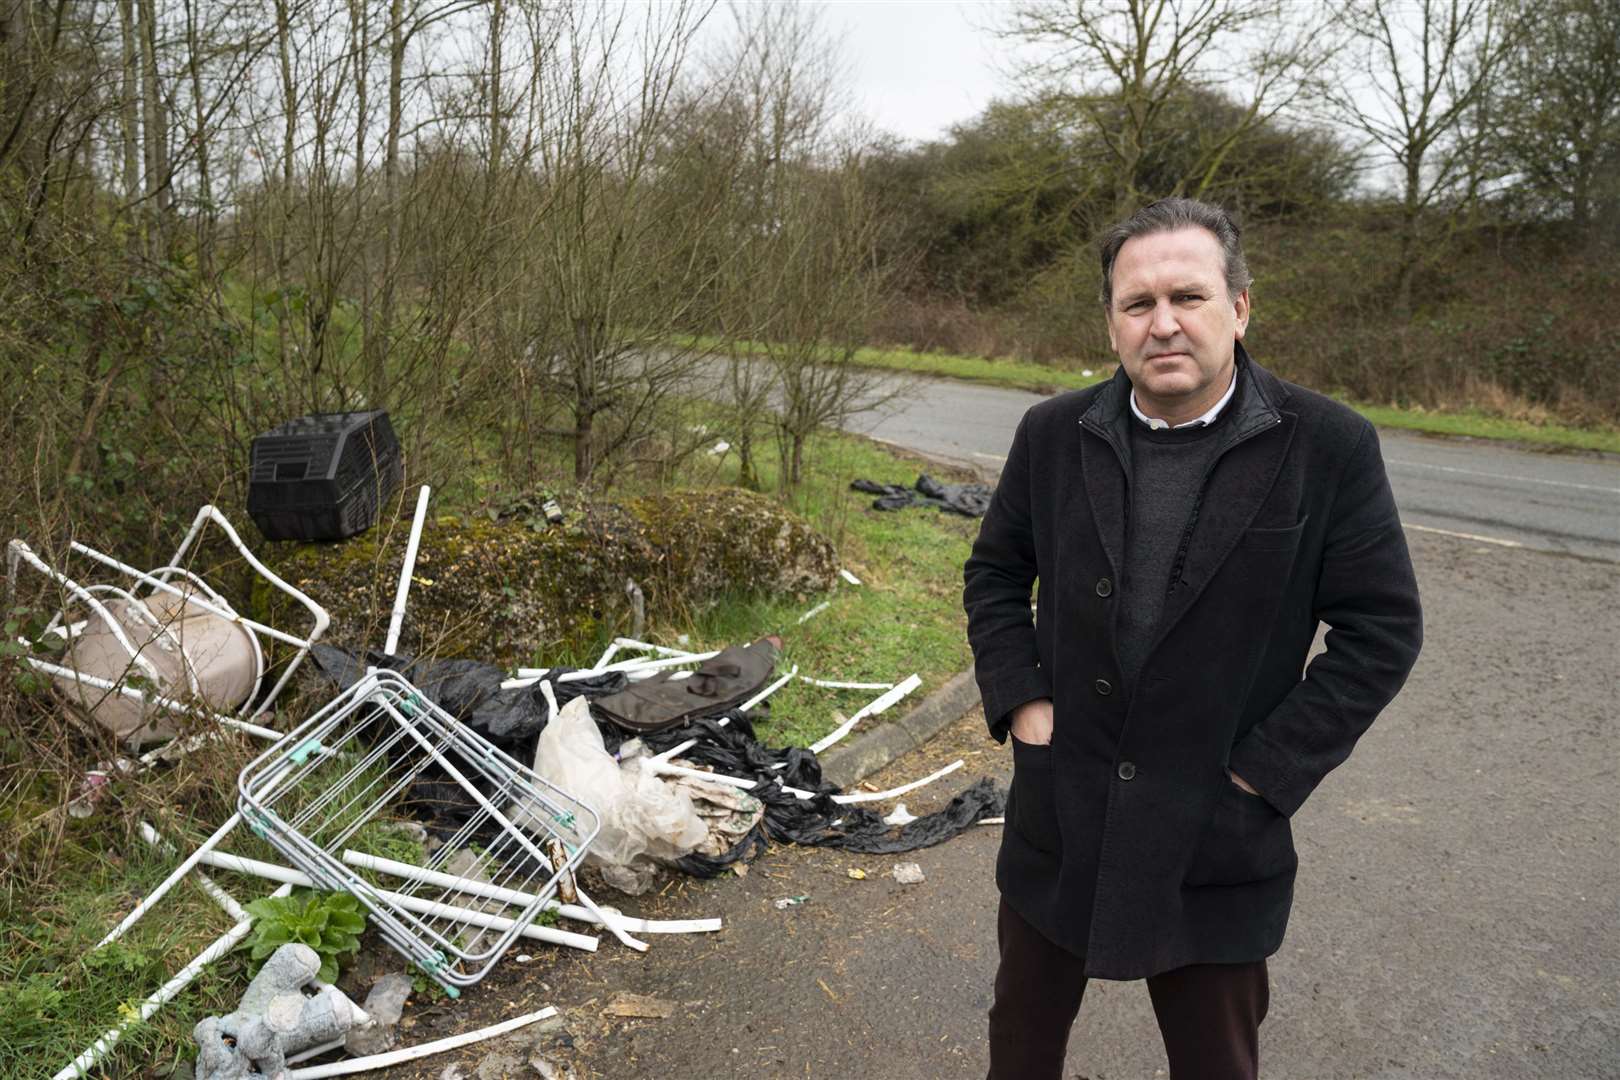 Danny Lucas finding more waste in Tonbridge and Malling